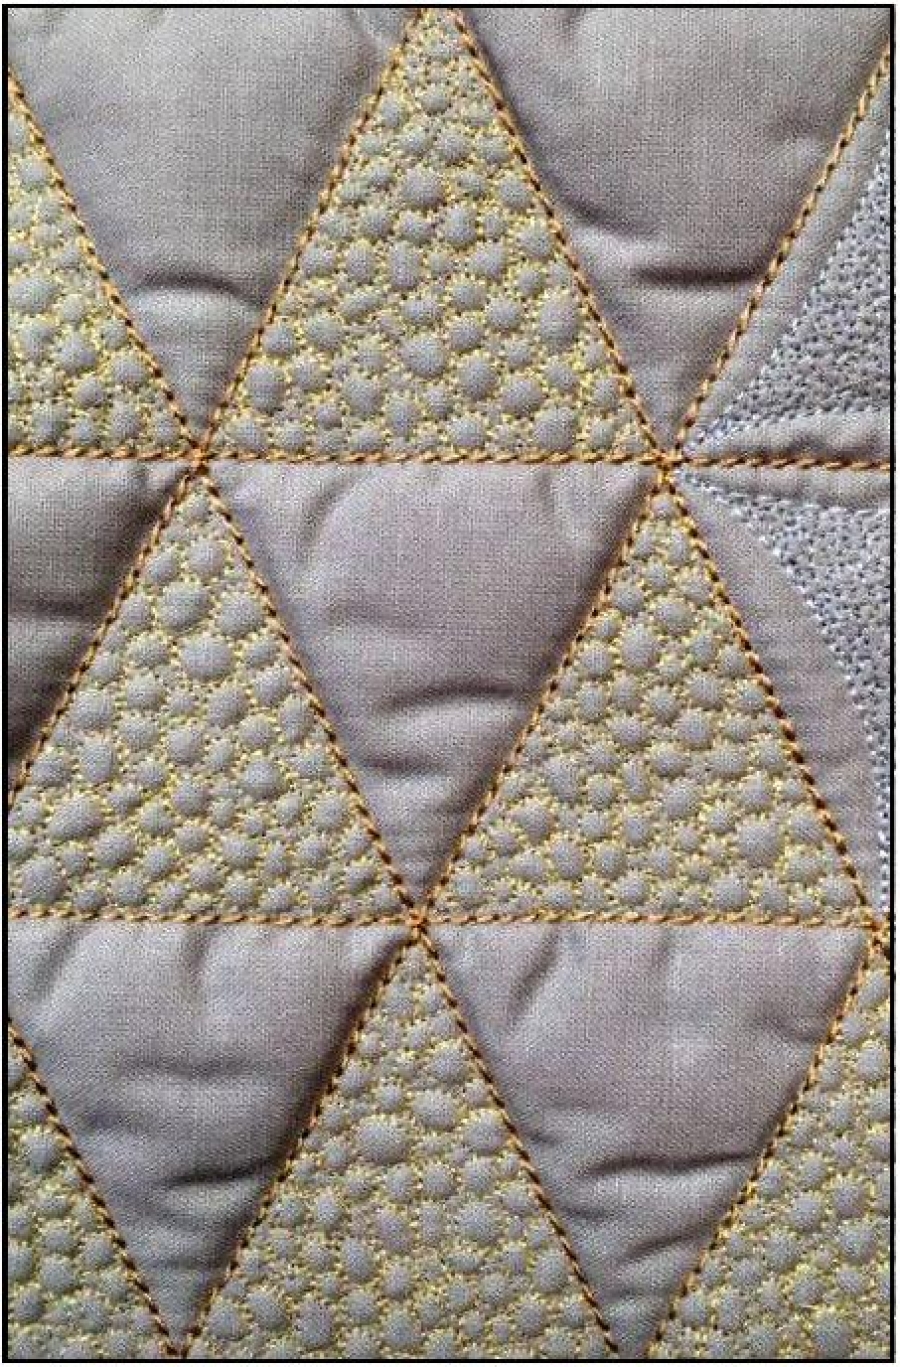 What are Quilting Fillers?